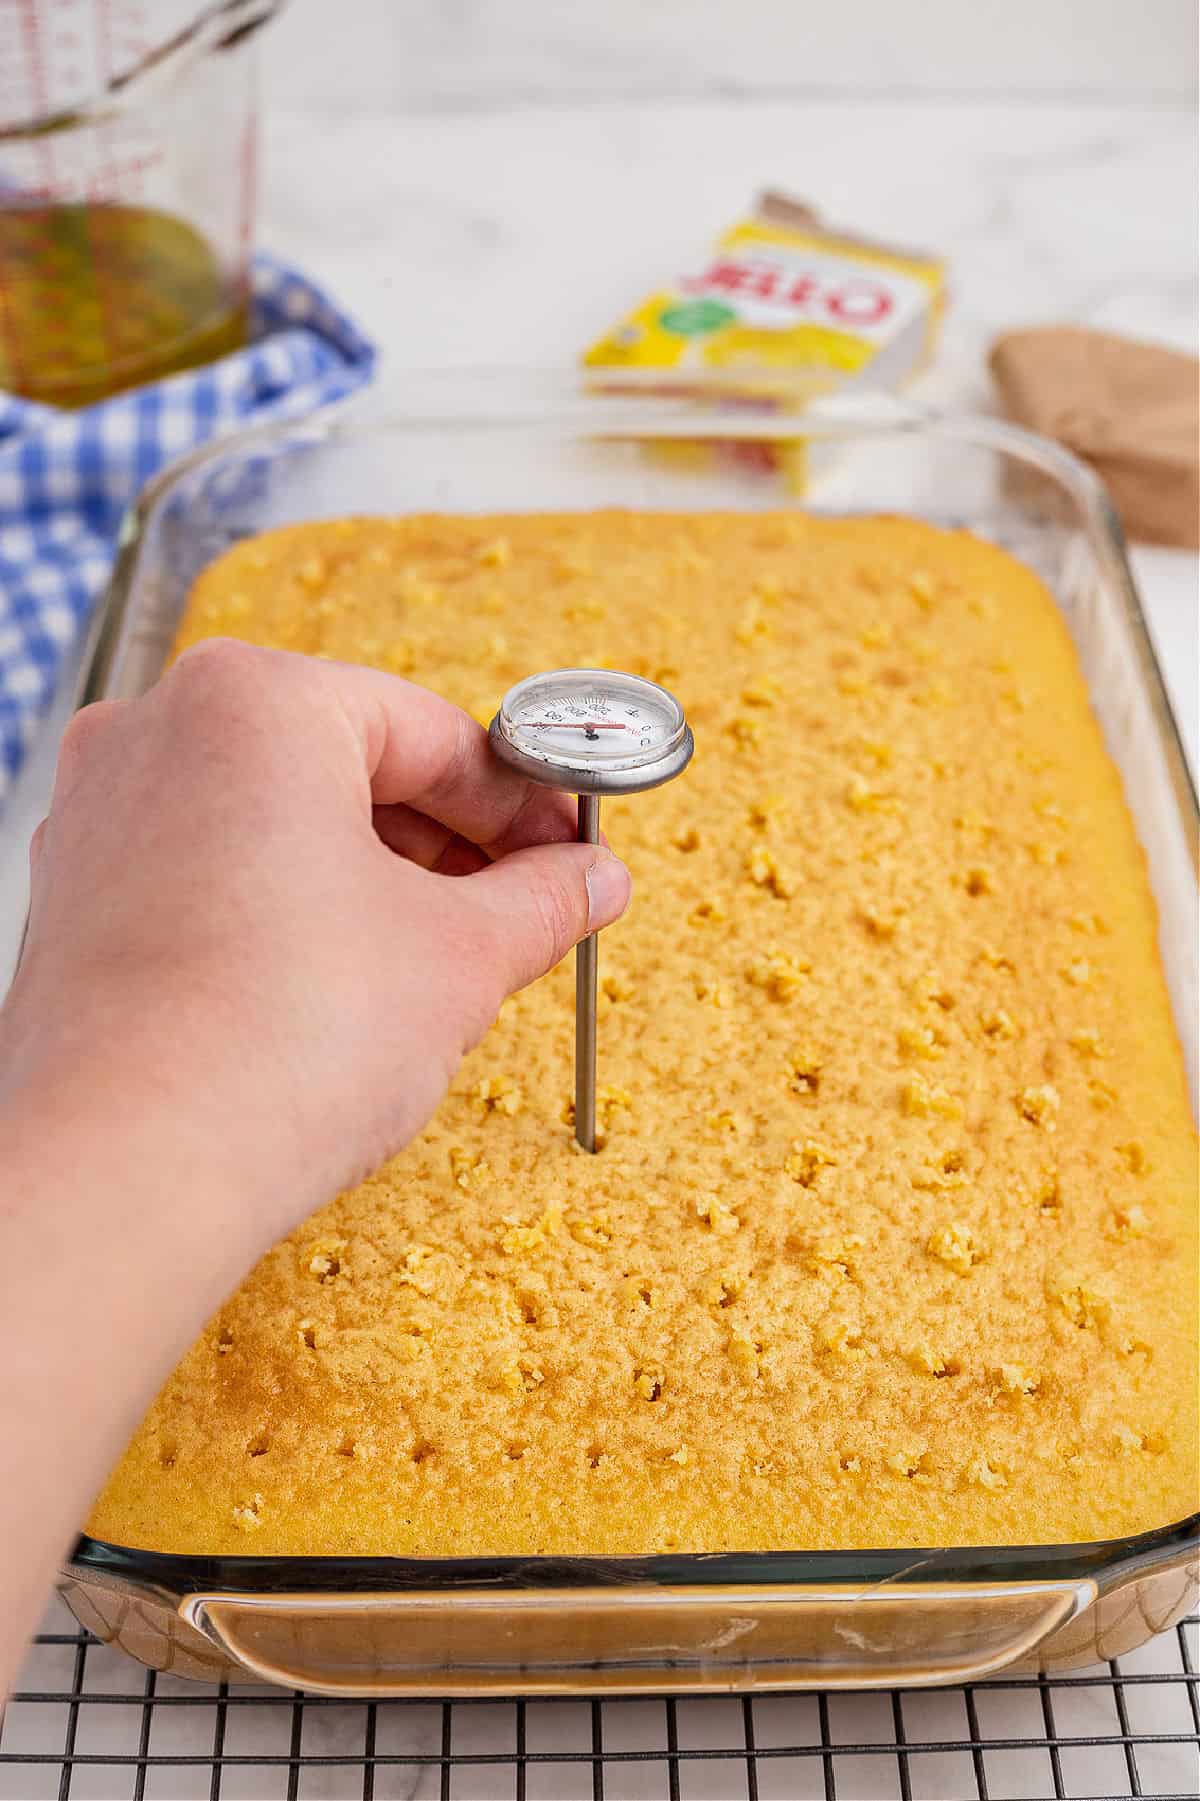 Holes being poked into a cake using a meat thermometer.